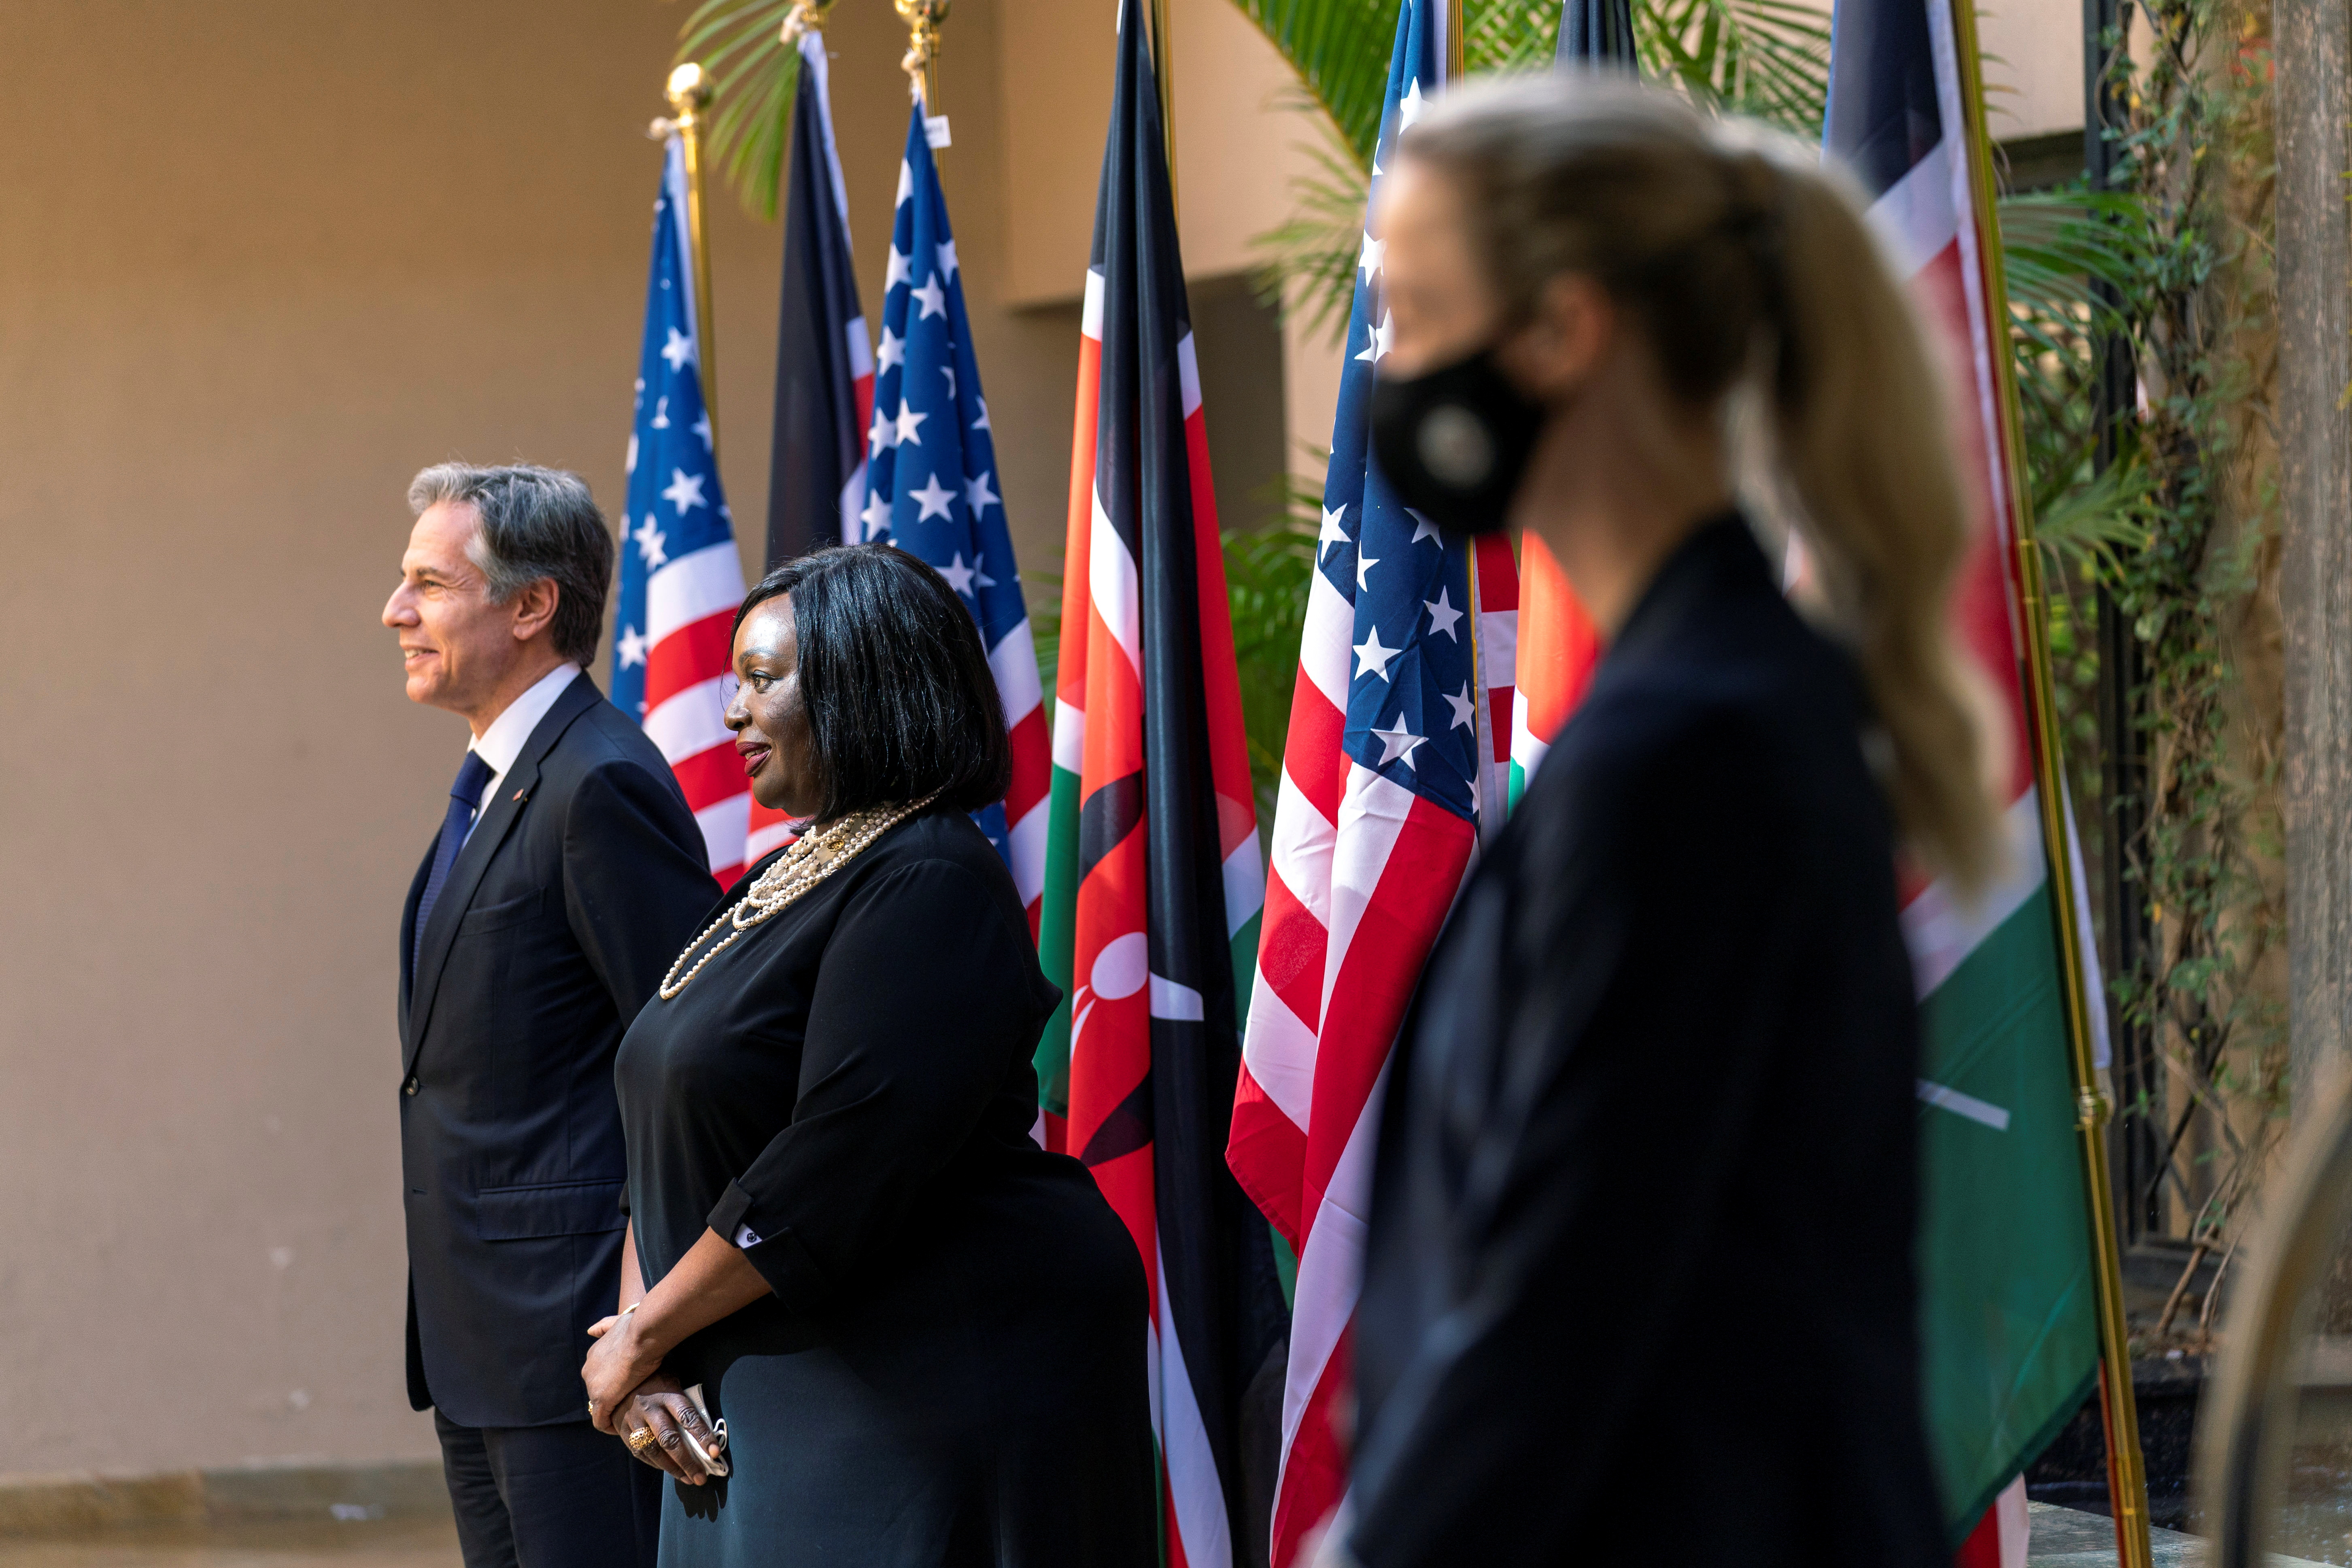 U.S Secretary of State Antony Blinken and Kenya's Cabinet Secretary for Foreign Affairs, Ambassador Raychelle Omamo, pose for photographs as they arrive for a news conference at the Serena Hotel in Nairobi, Kenya. November 17, 2021. Andrew Harnik/Pool via REUTERS